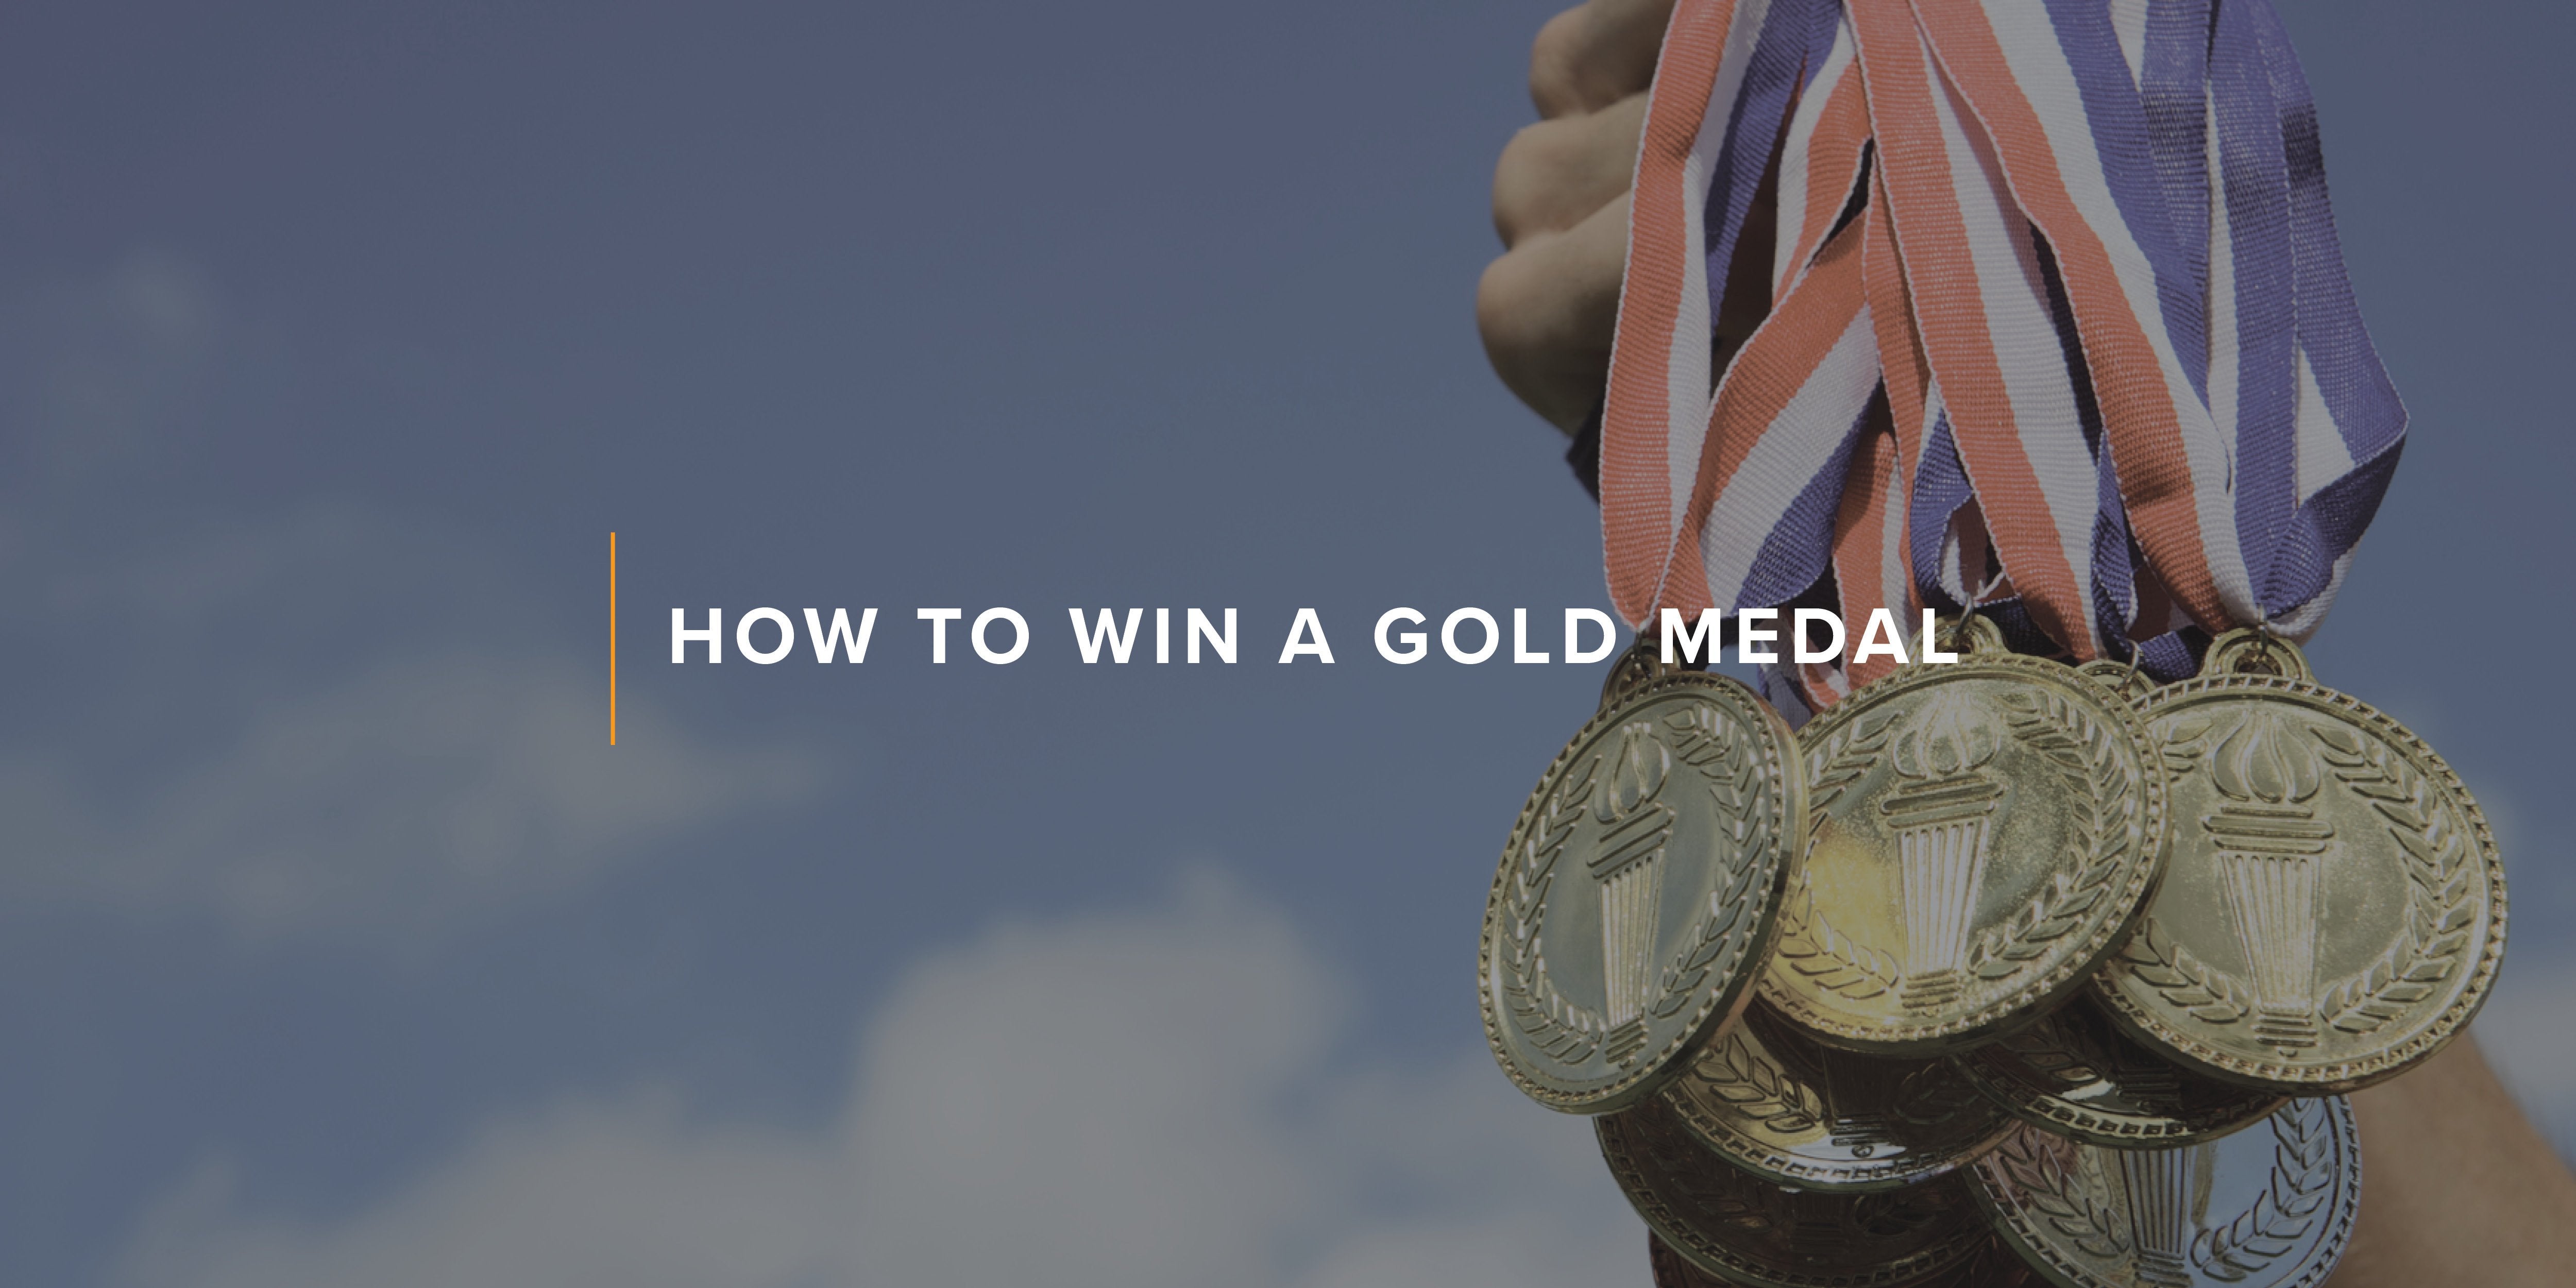 How to Win a Gold Medal